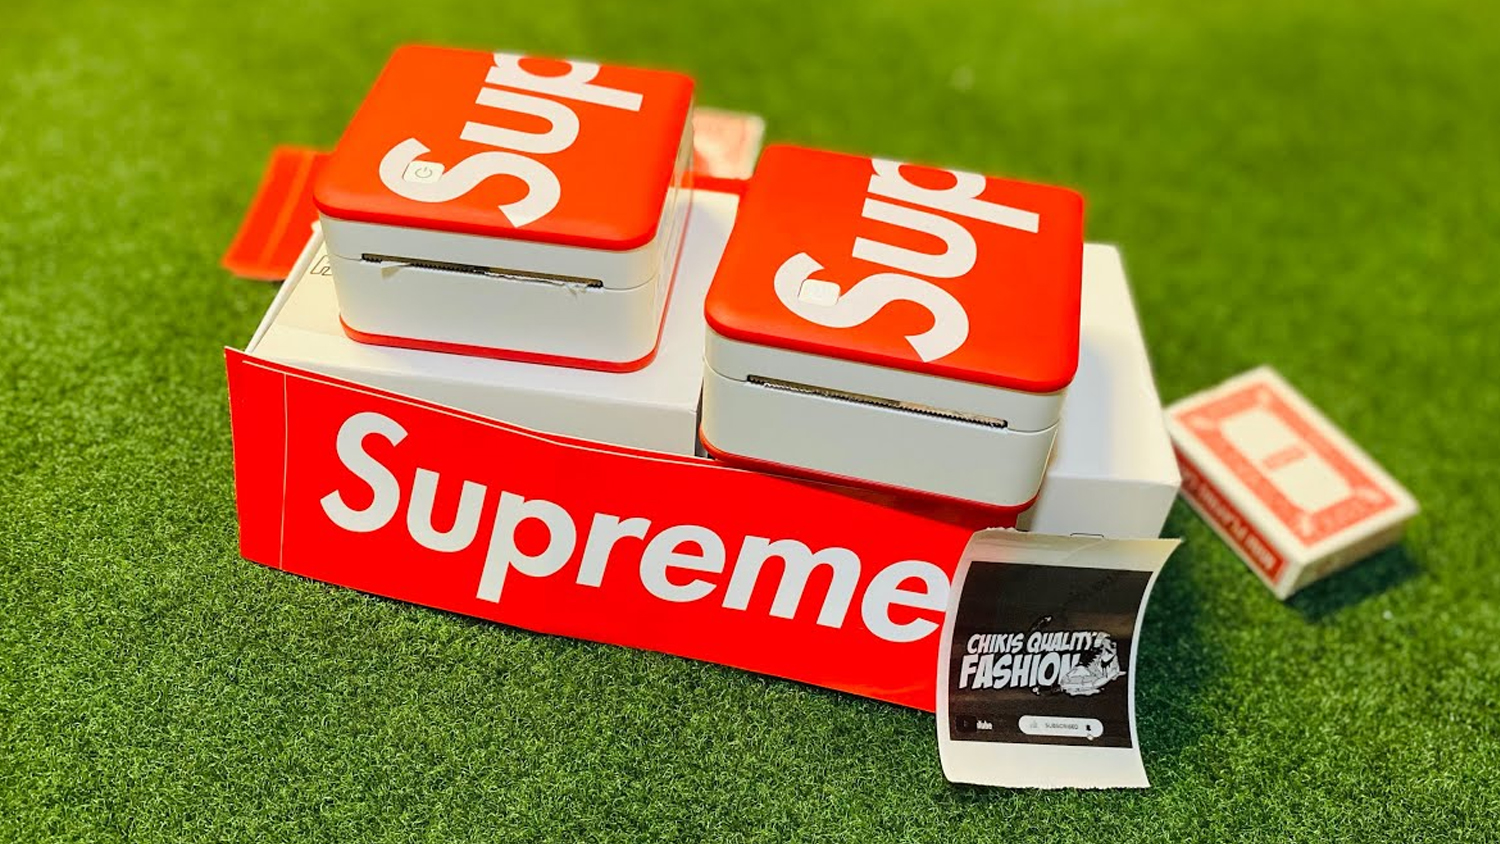 The Best Supreme Accessories for Your Home, Ever